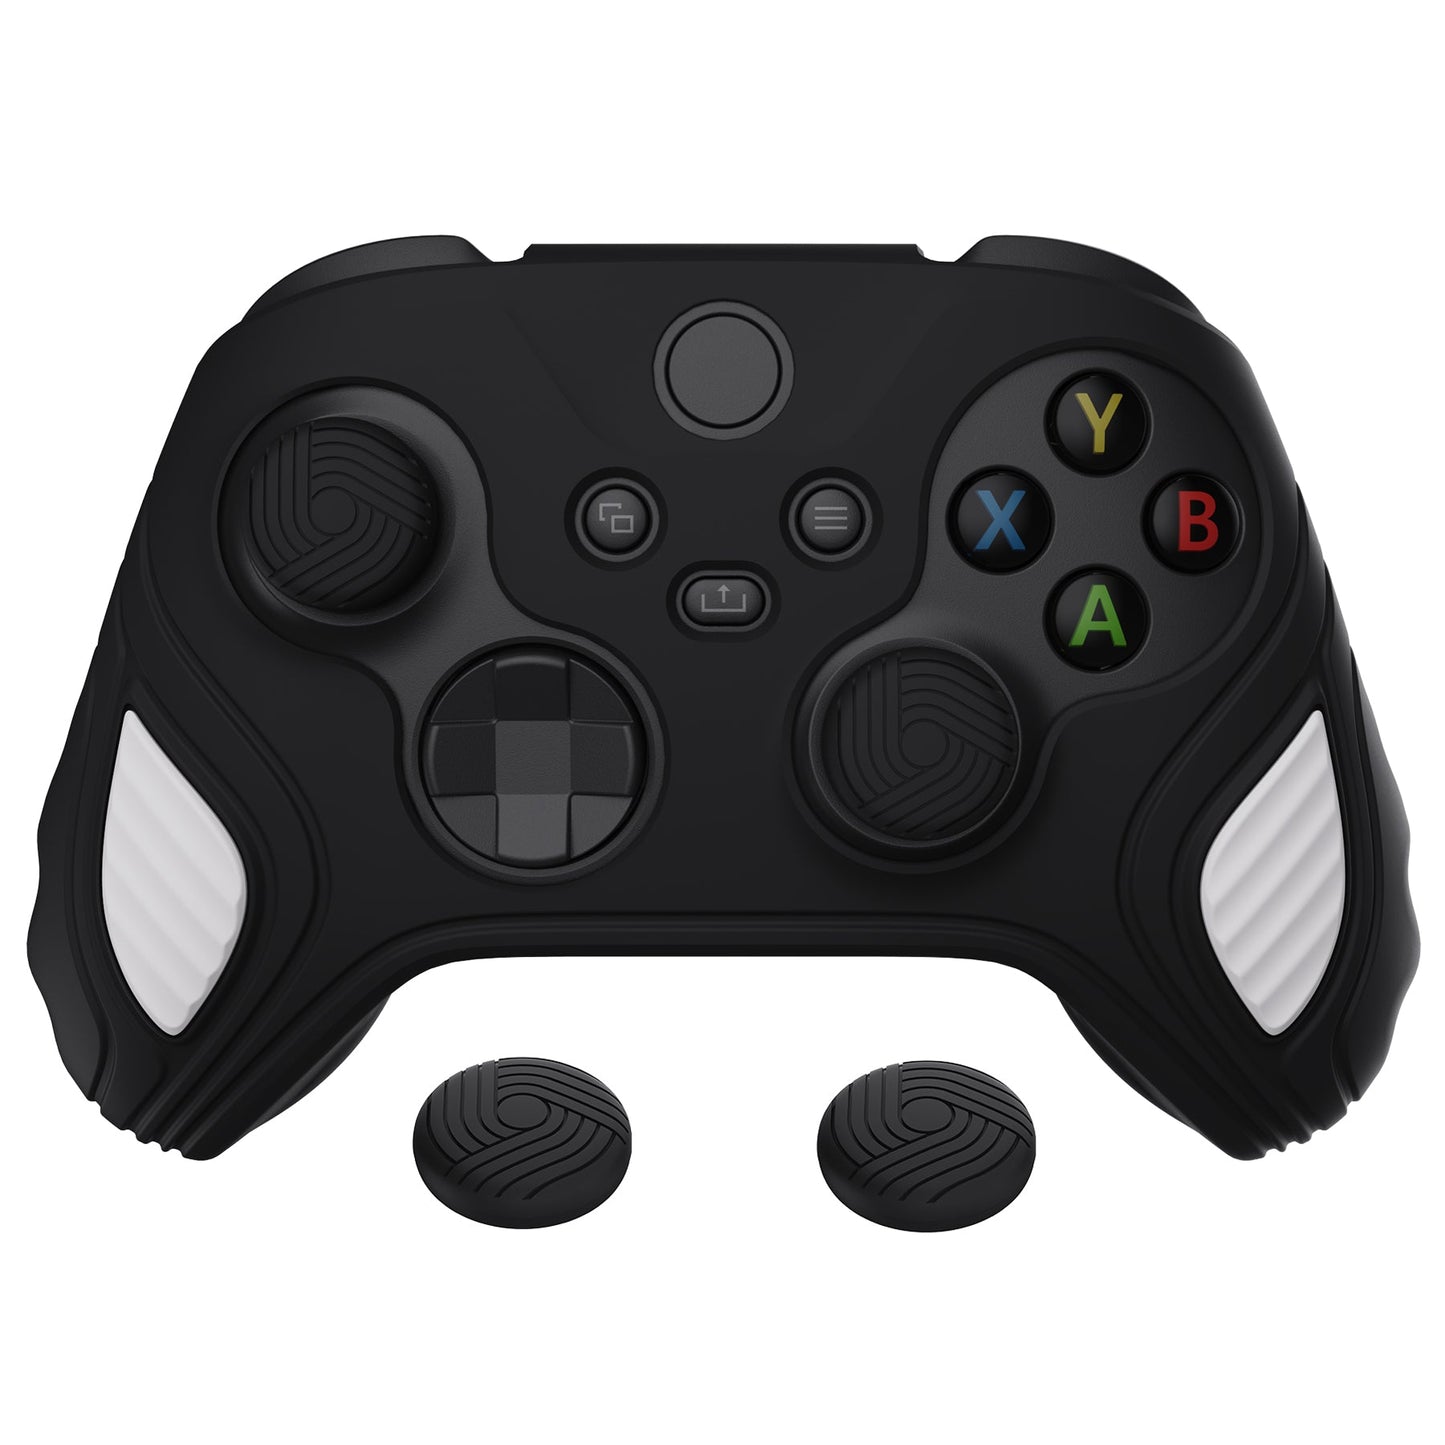 PlayVital Scorpion Edition Anti-Slip Silicone Case Cover for Xbox Series X/S Controller, Soft Rubber Case for Xbox Core Controller with Thumb Grip Caps - Black & White - SPX3003 PlayVital